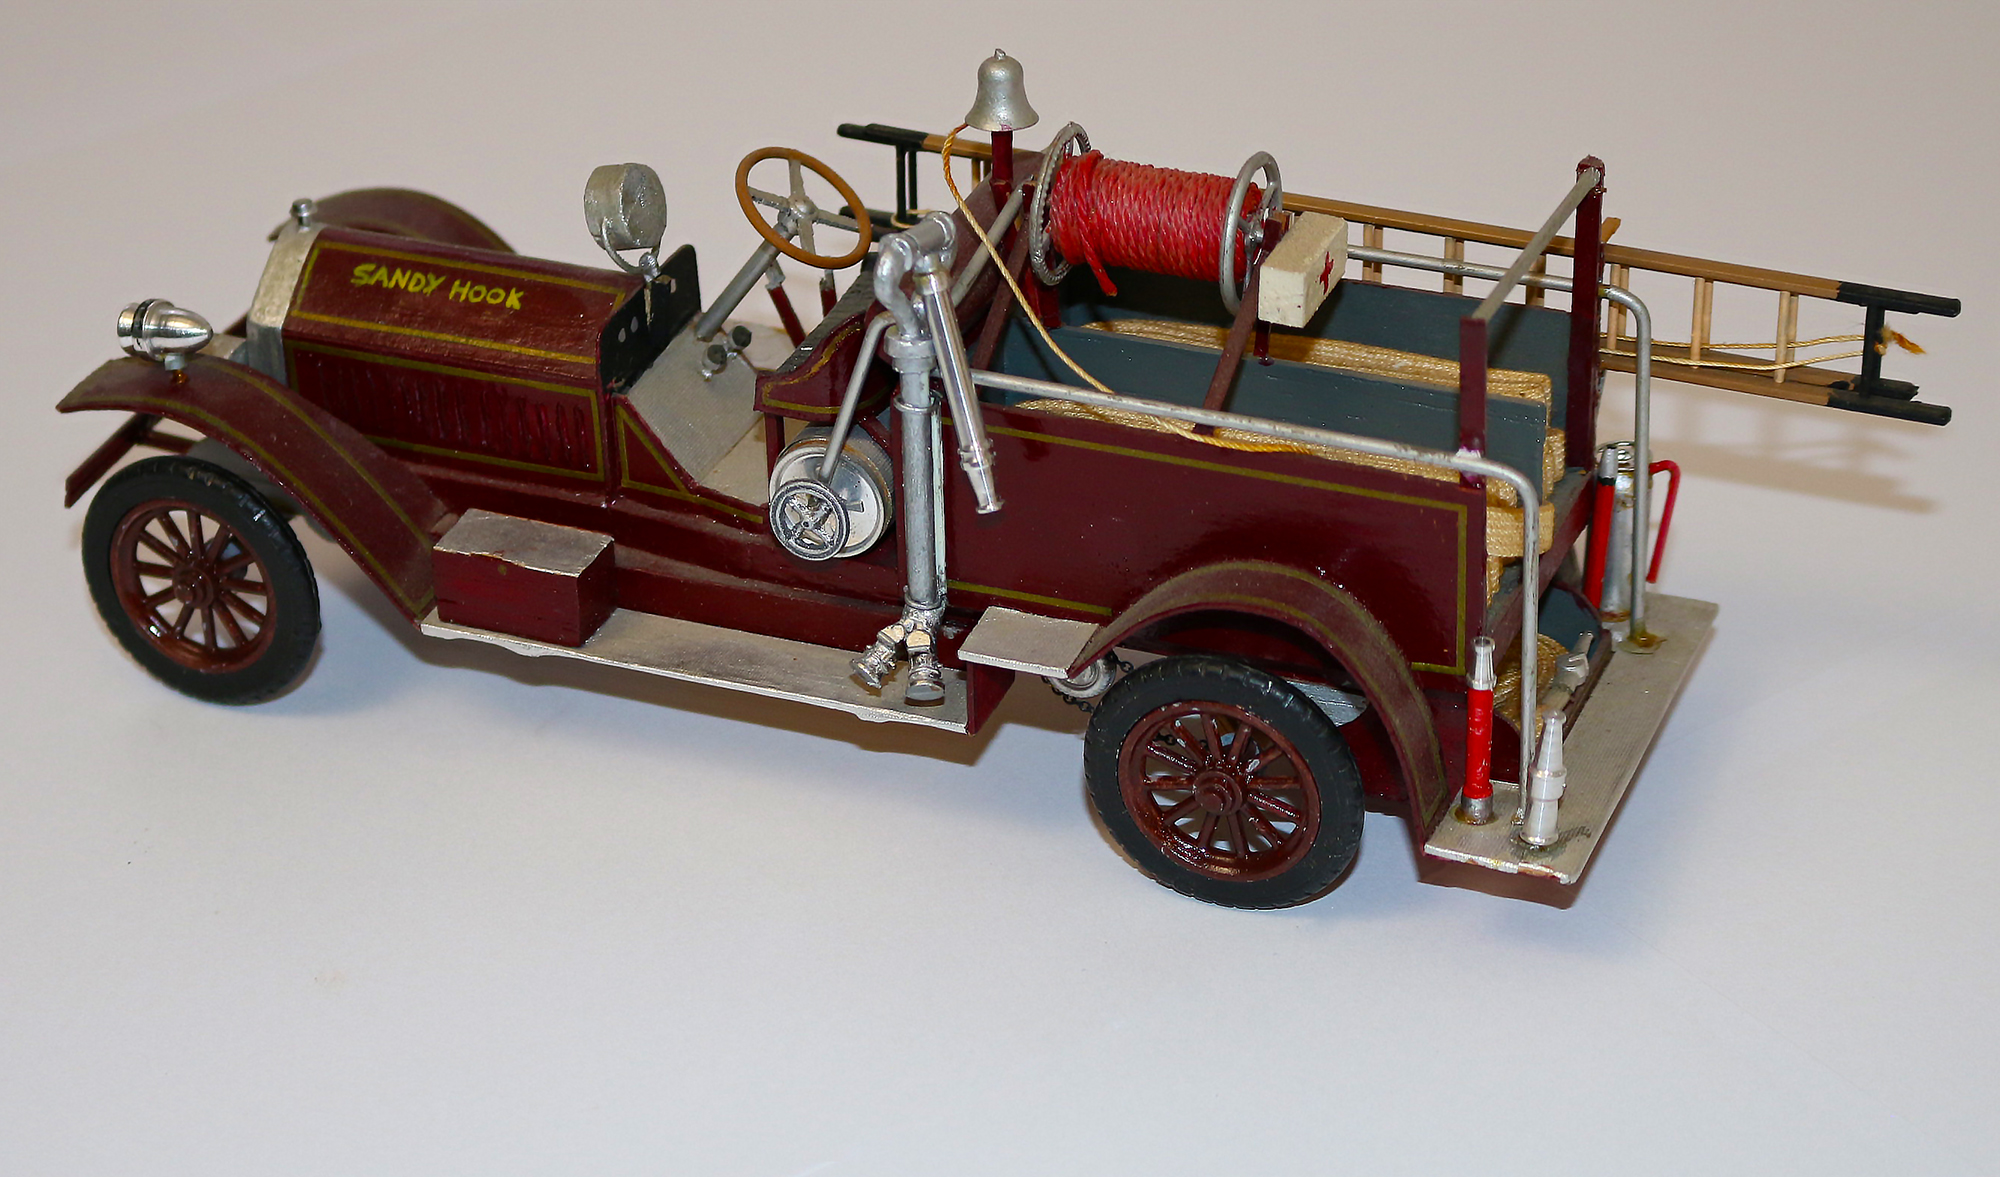 A side view of the scale 1916 American LaFrance chemical car.